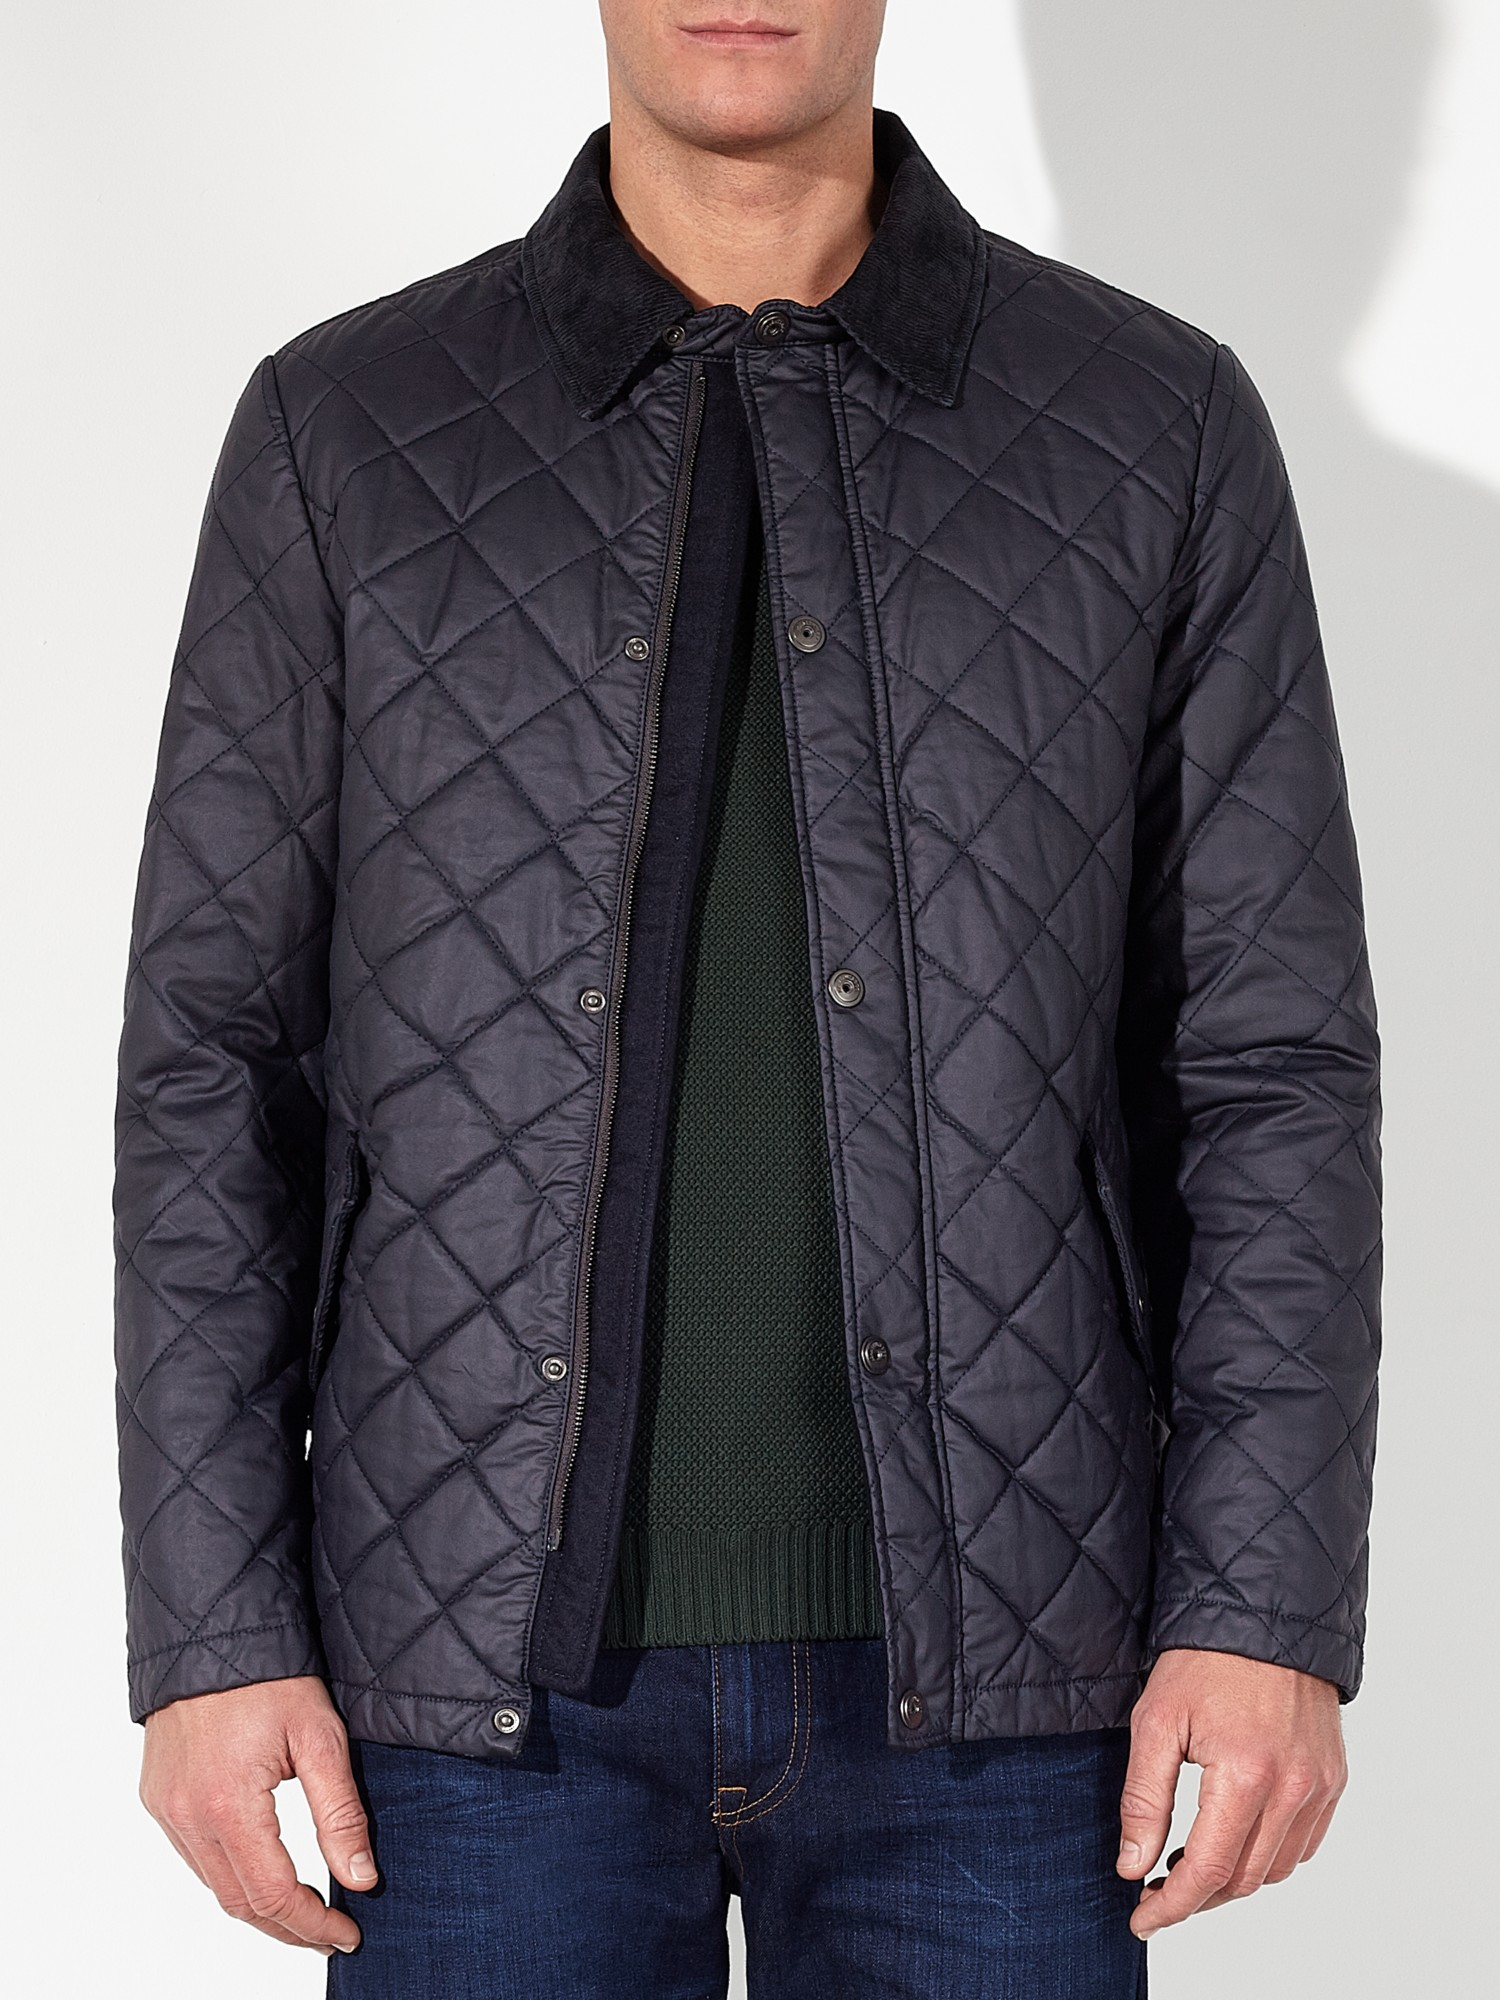 John lewis Waxed Cotton Quilted Jacket in Blue for Men (Dark Navy) | Lyst